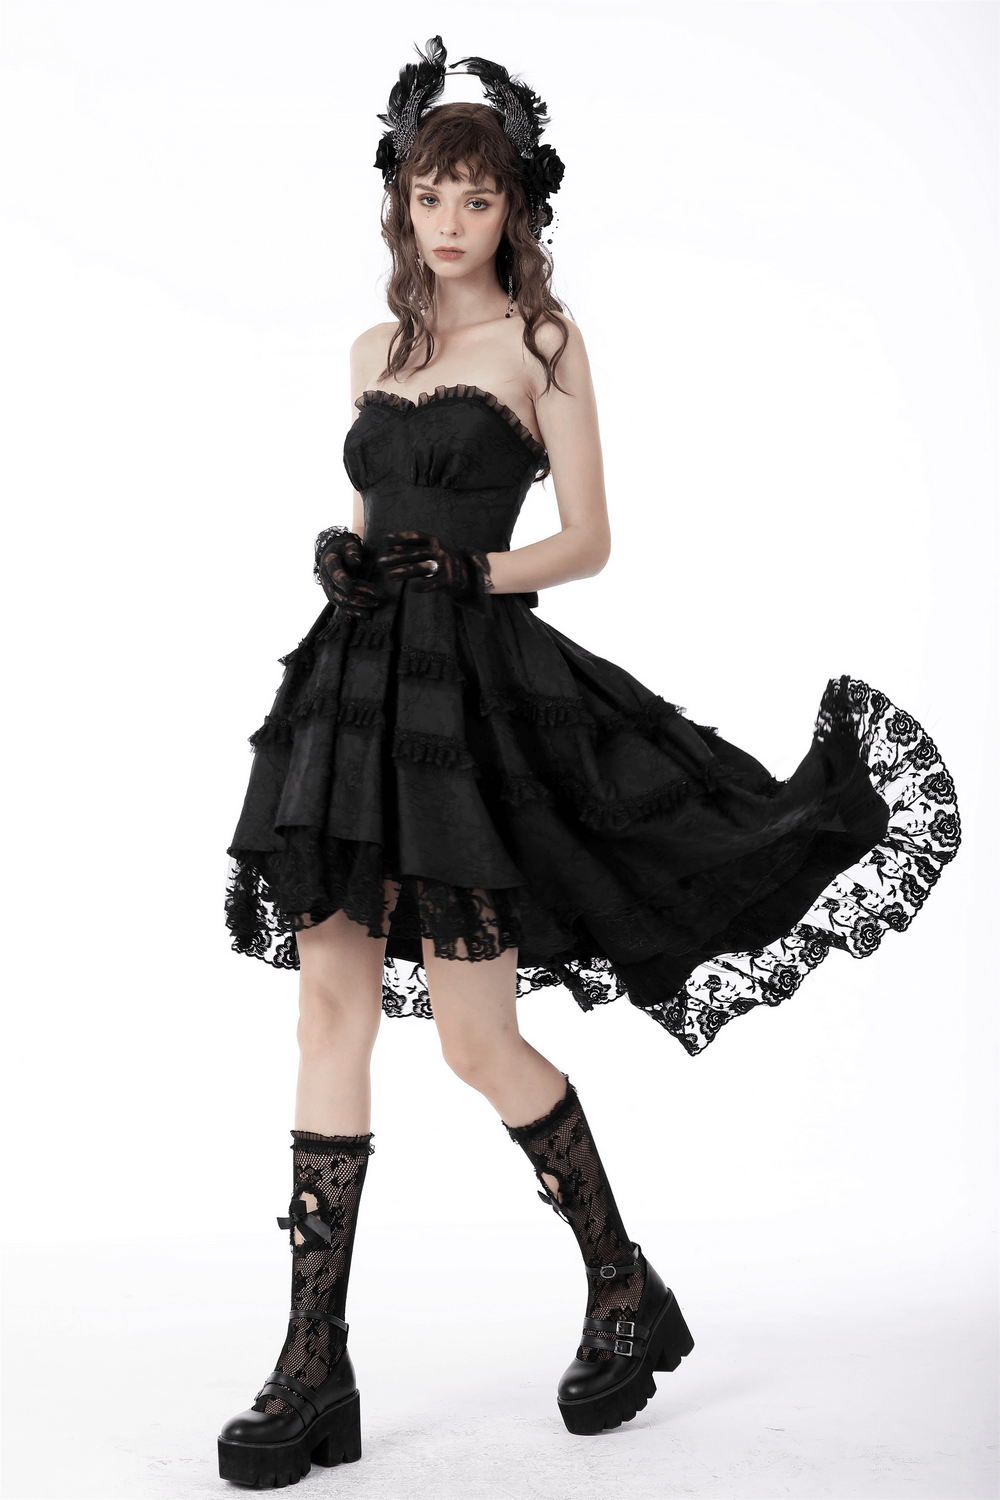 Elegant Black Lace Tiered Evening Dress - Perfect for Events